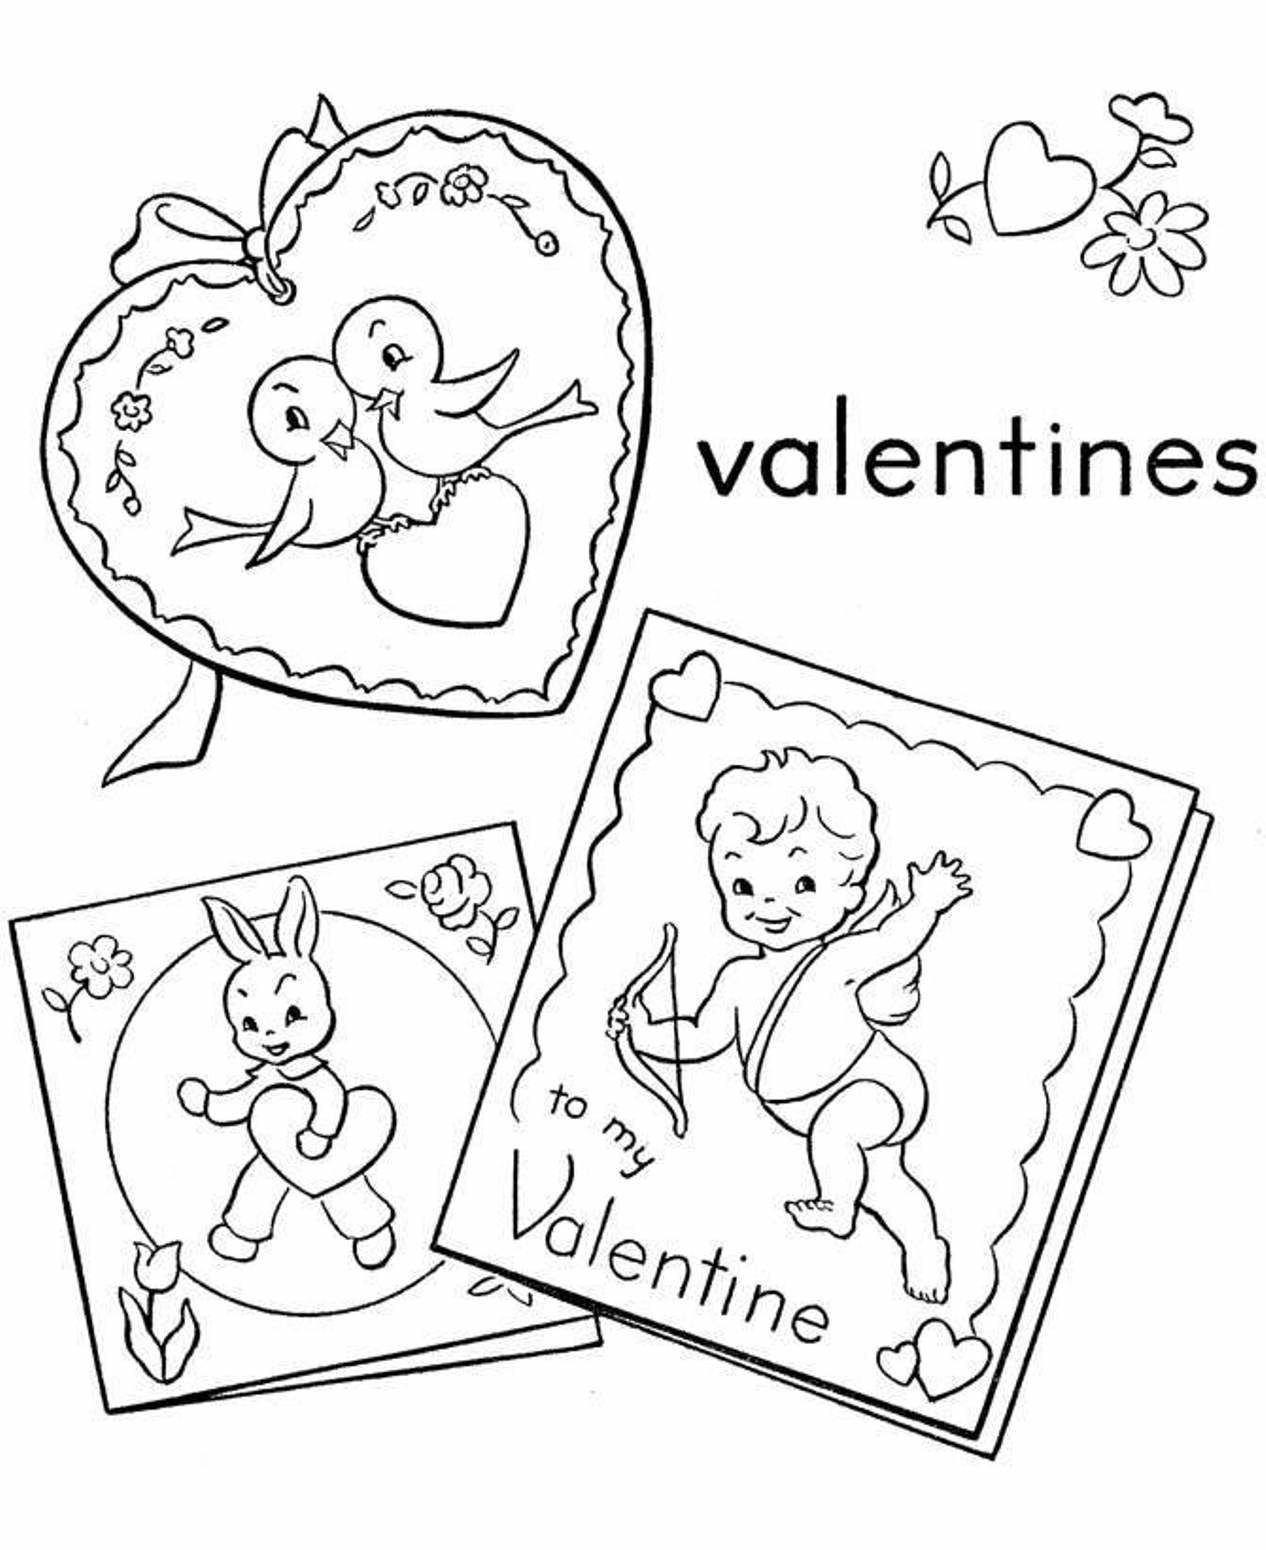 Get Well Soon Coloring Pages Christian Get Well Soon Coloring ...